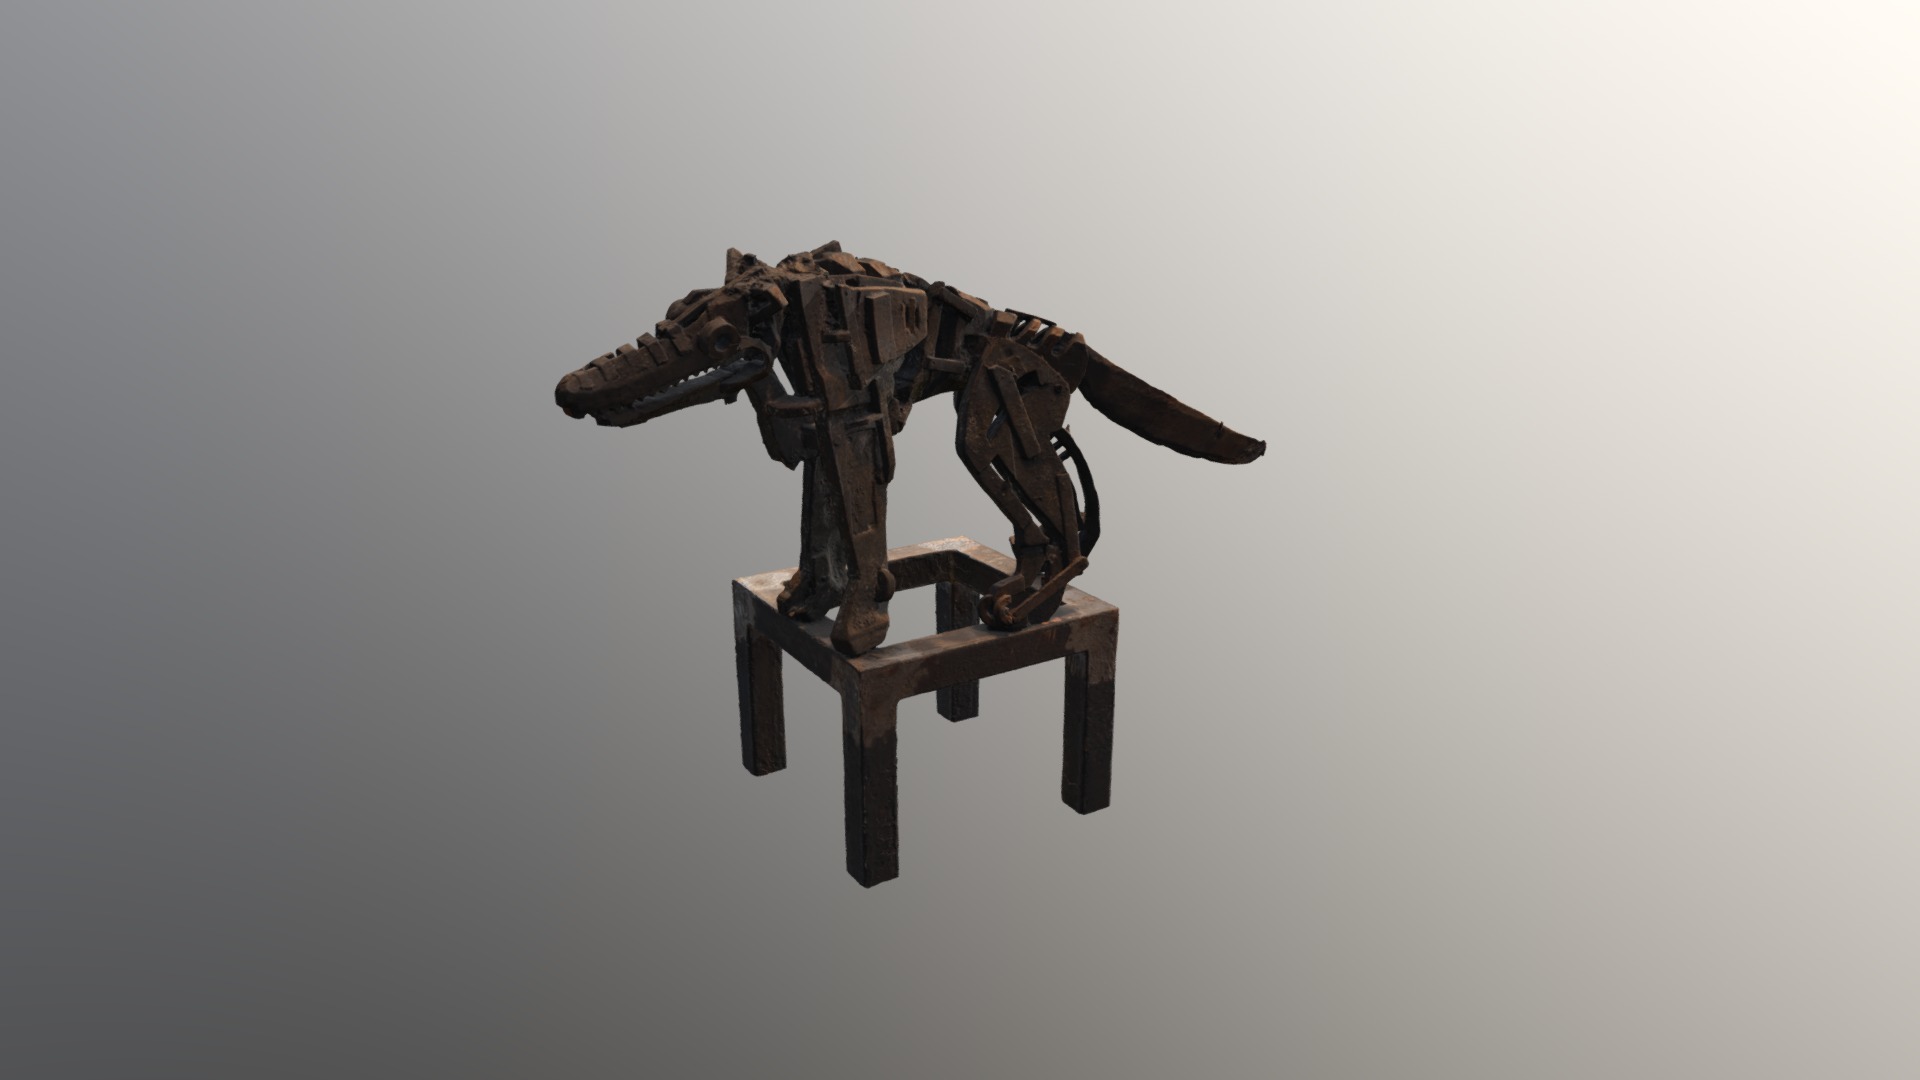 3D model Wolf metal engry scary 700k - This is a 3D model of the Wolf metal engry scary 700k. The 3D model is about a machine on the white cover.